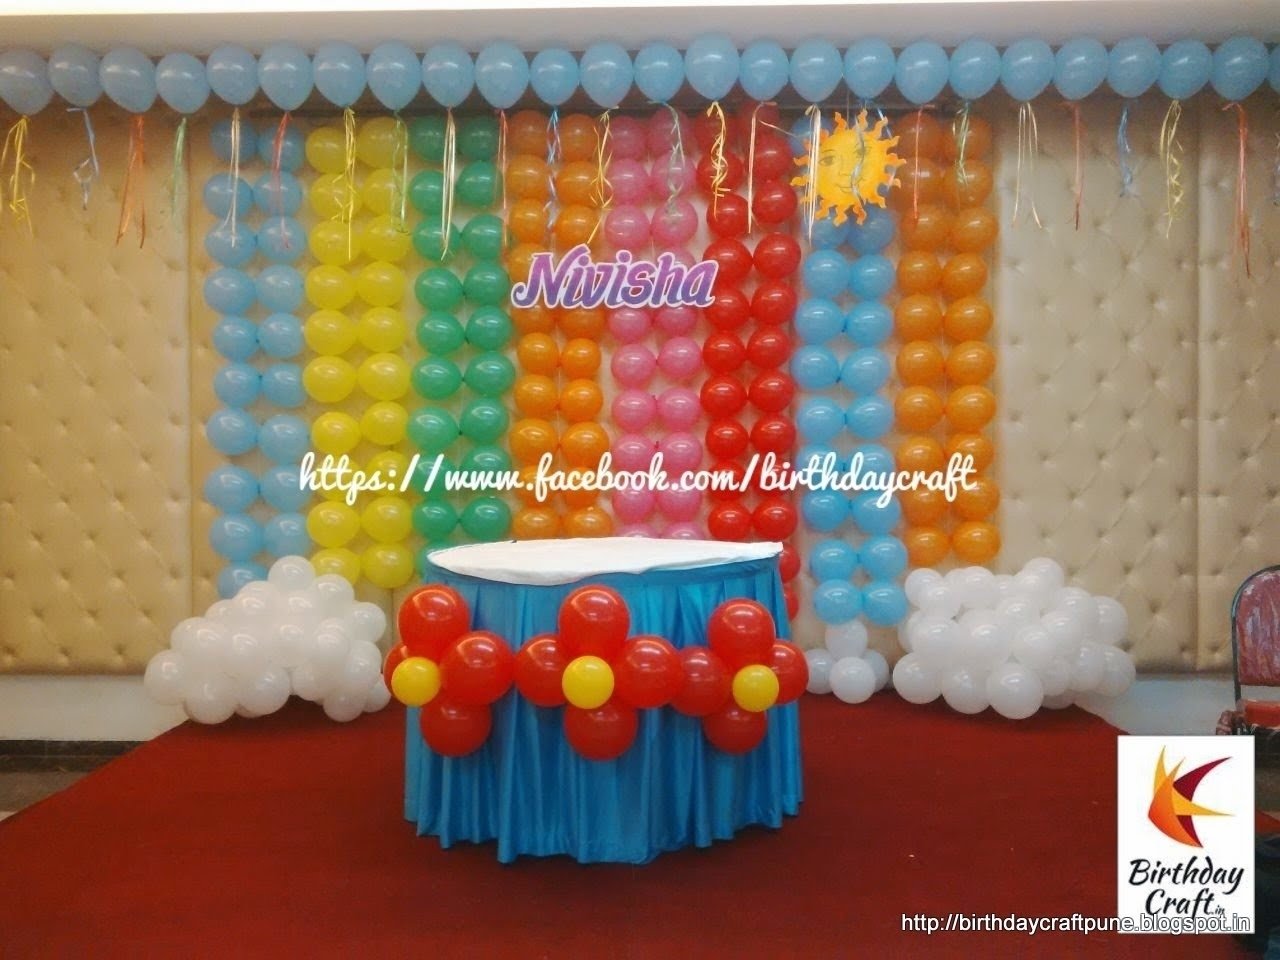 10 Cute Kids Birthday Party Ideas At Home birthday parties kids party decorations home tierra este 59851 2 2022